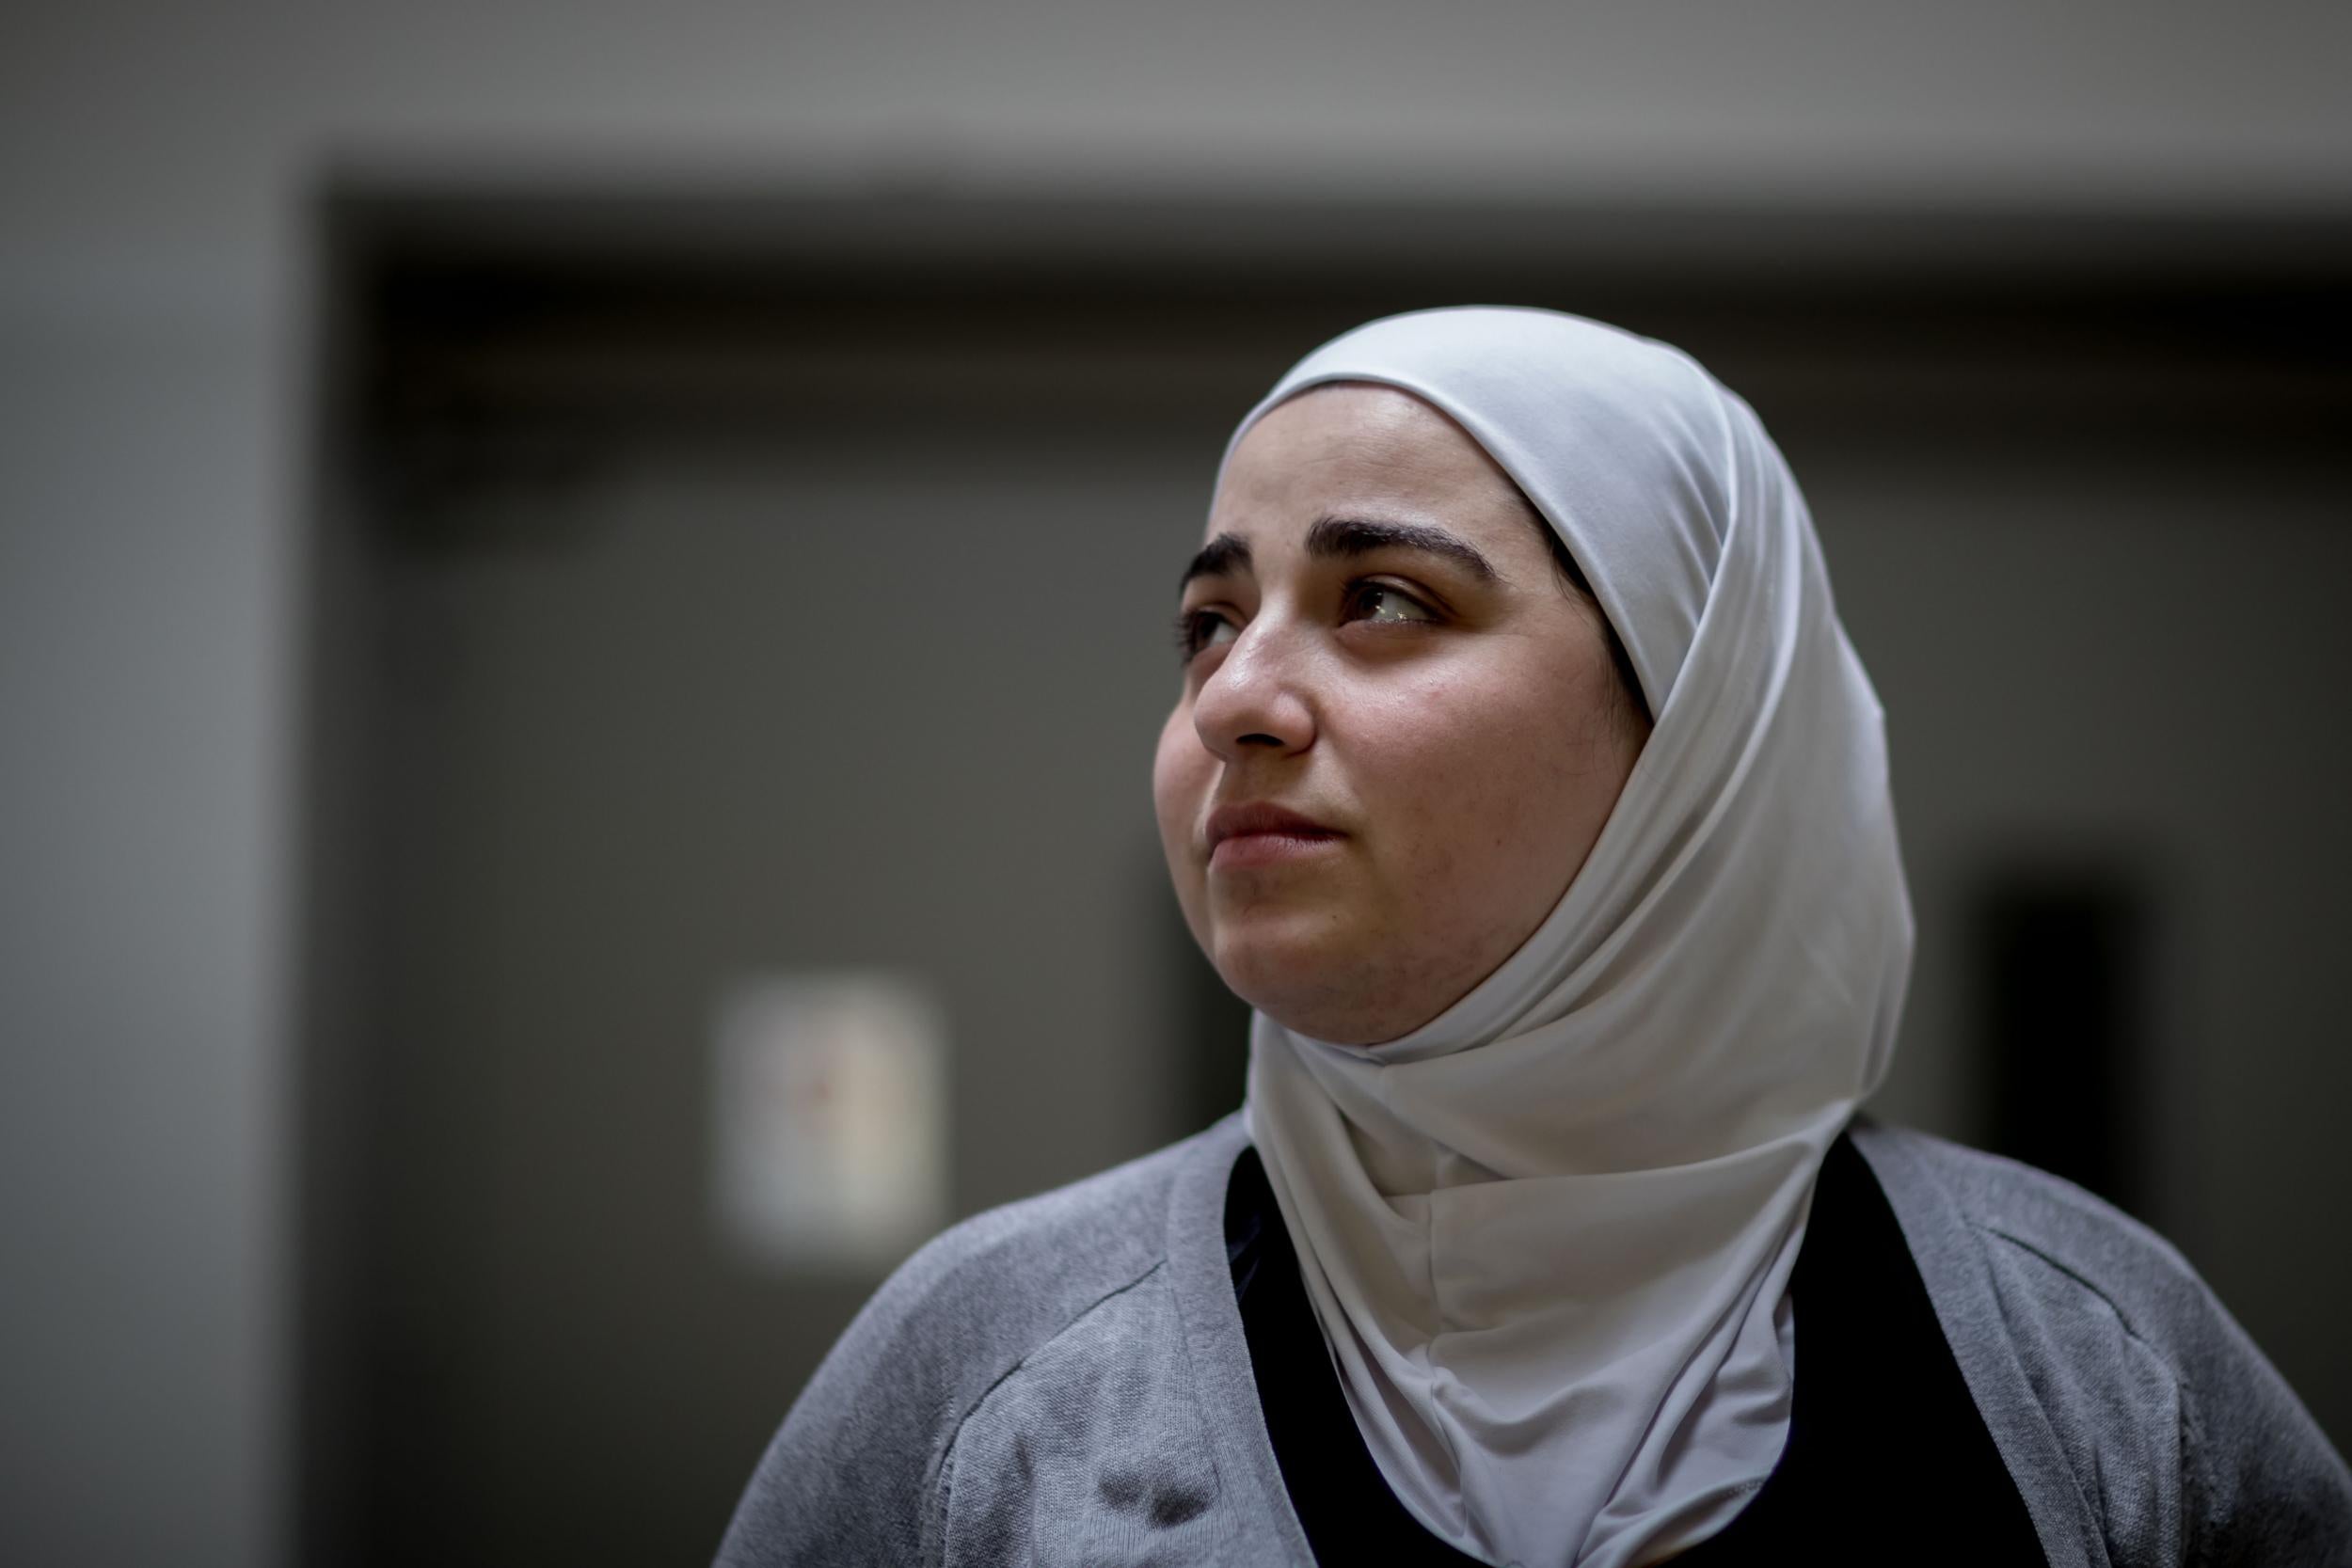 Abier Farhud, a victim of torture and abuse in a Syrian regime prison. She is among seven survivors who have filed a criminal complaint in Germany against secret service officials of Assad's government